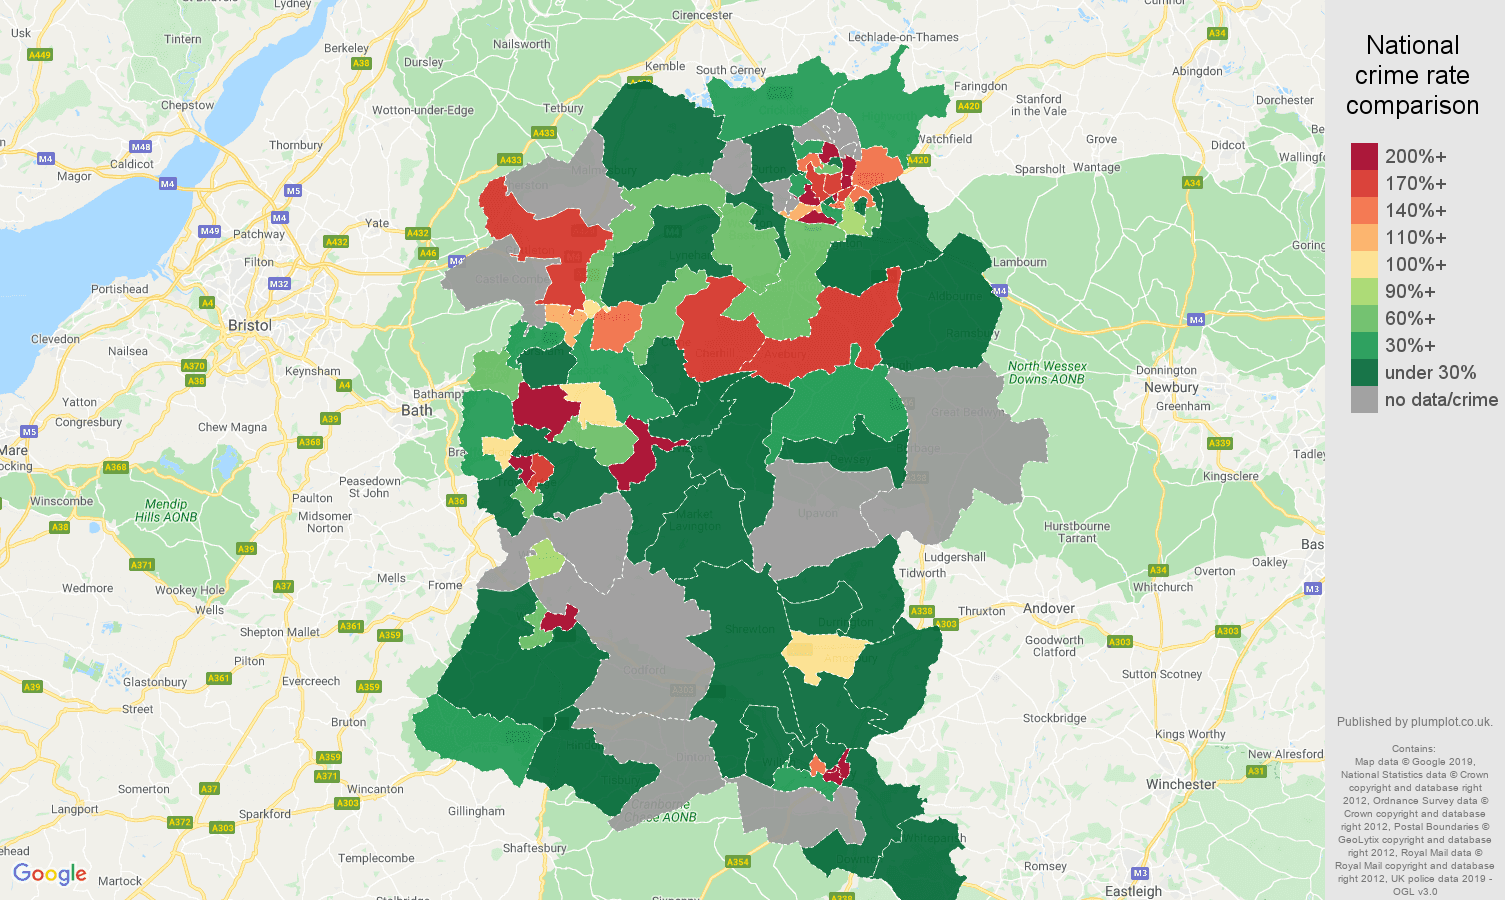 Wiltshire shoplifting crime rate comparison map